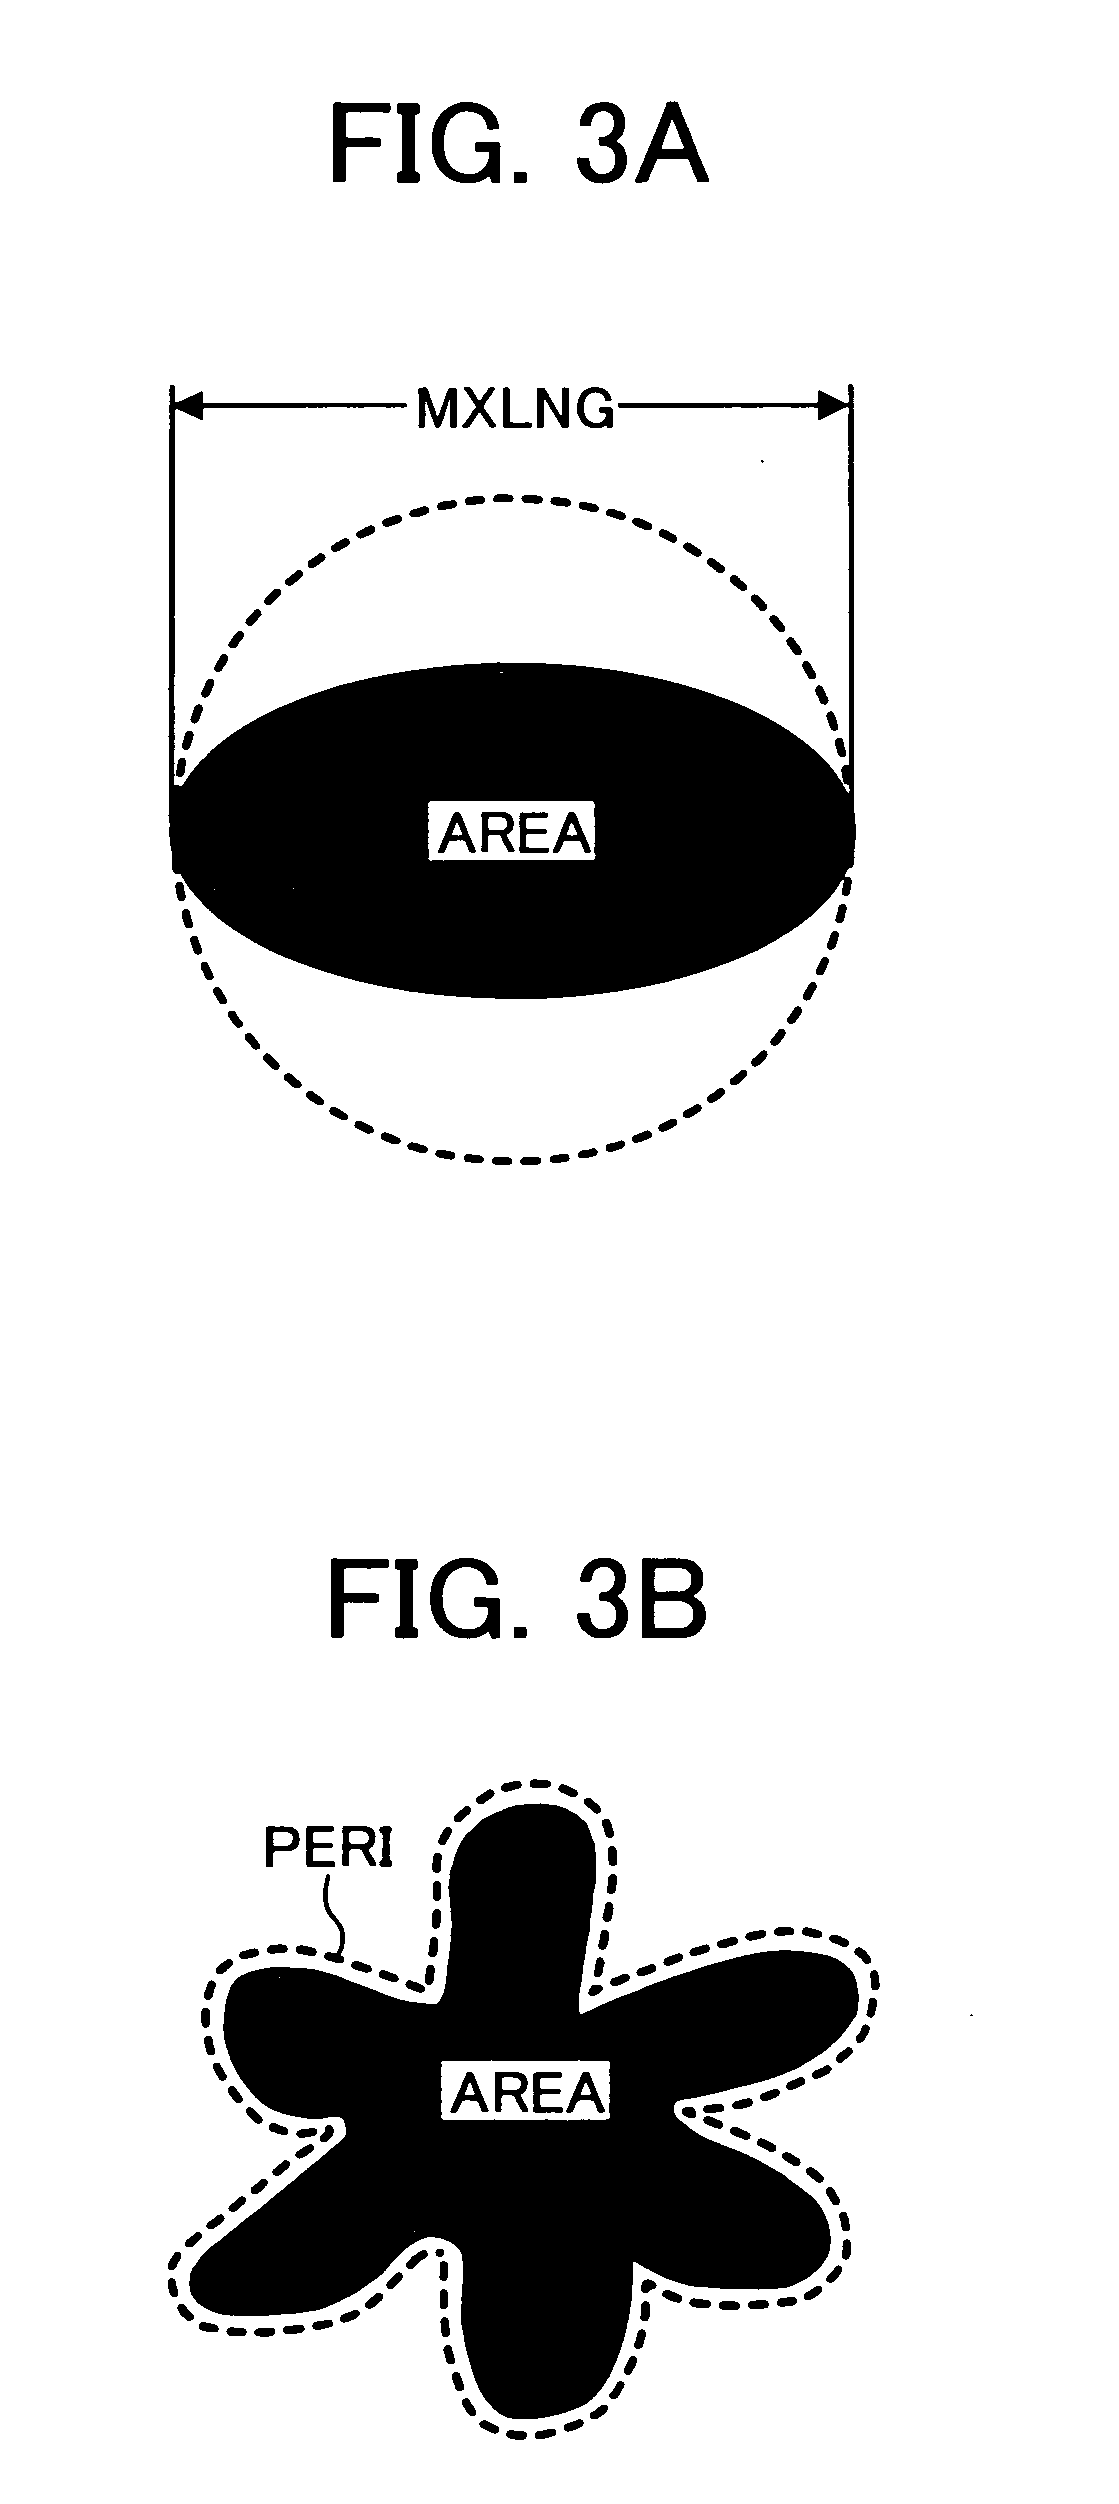 Method and apparatus for electrophotographic image forming capable of using a toner enhancing image quality and cleanability, and the toner used in the image forming